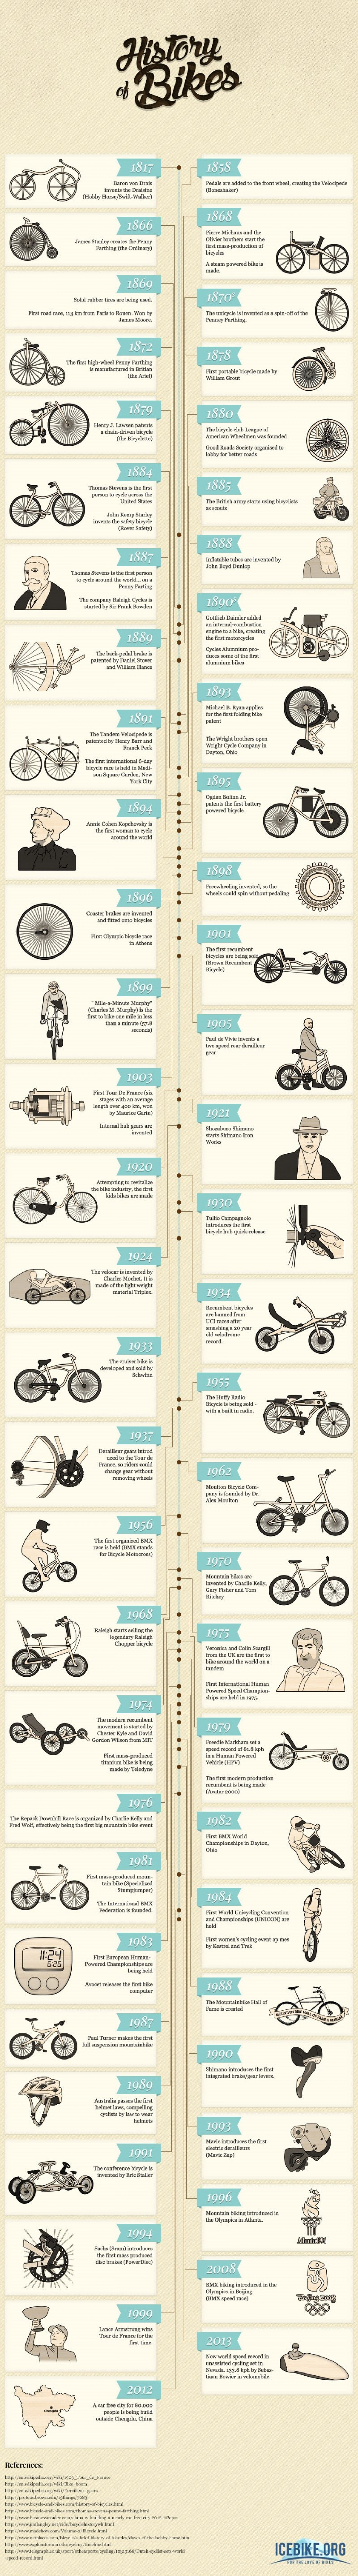 The History of Bikes Infographic